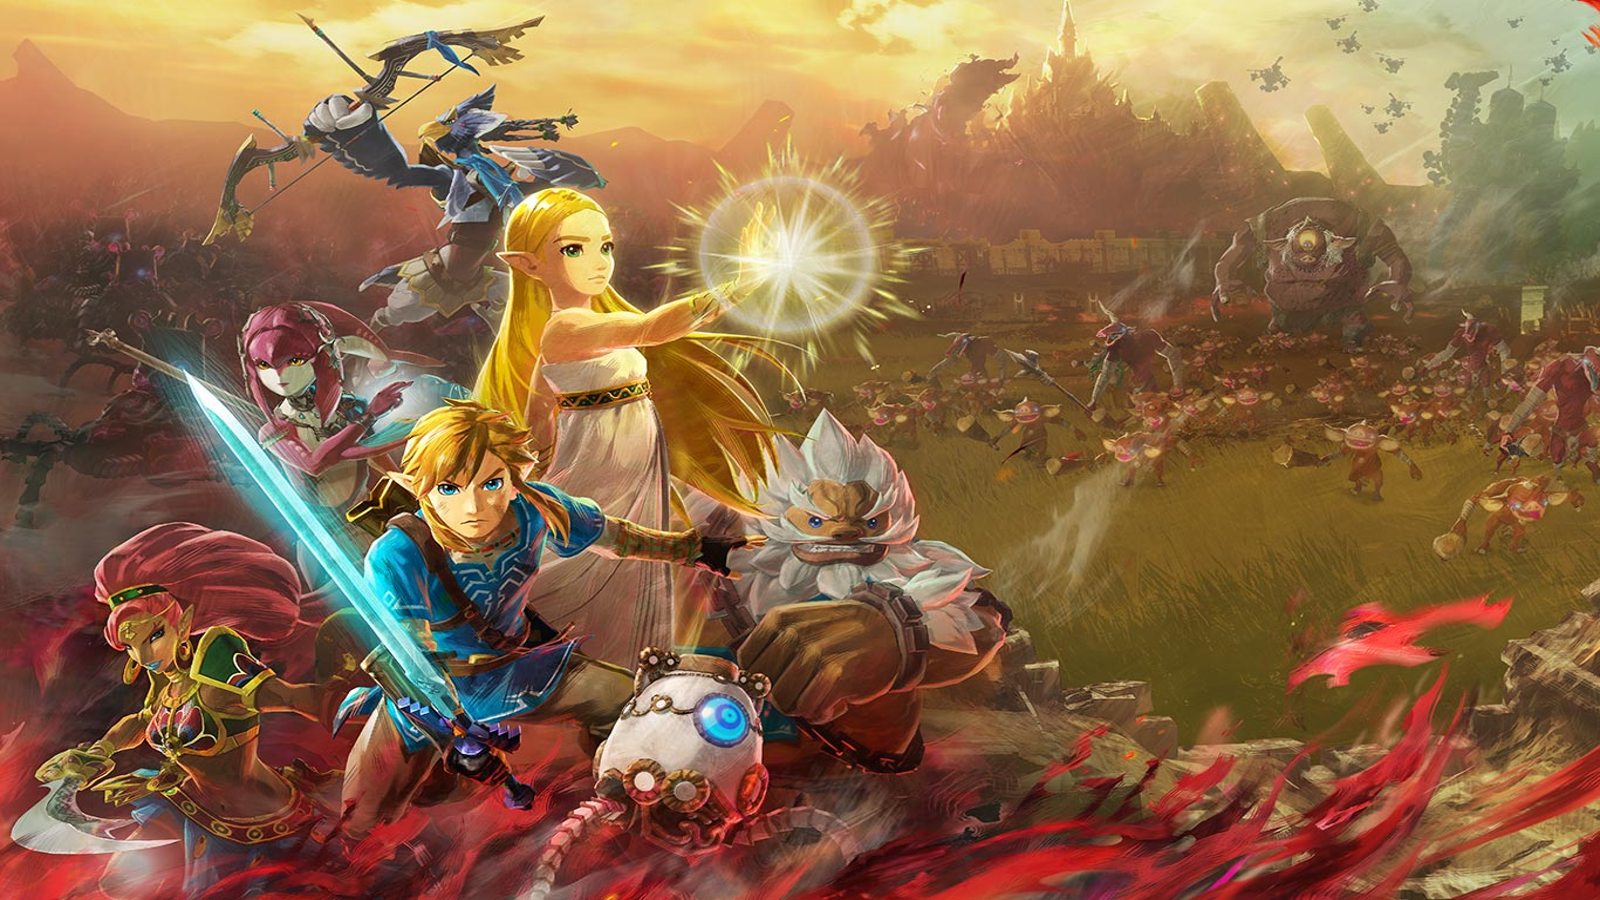 Video Game The Legend of Zelda: Breath of the Wild HD Wallpaper by